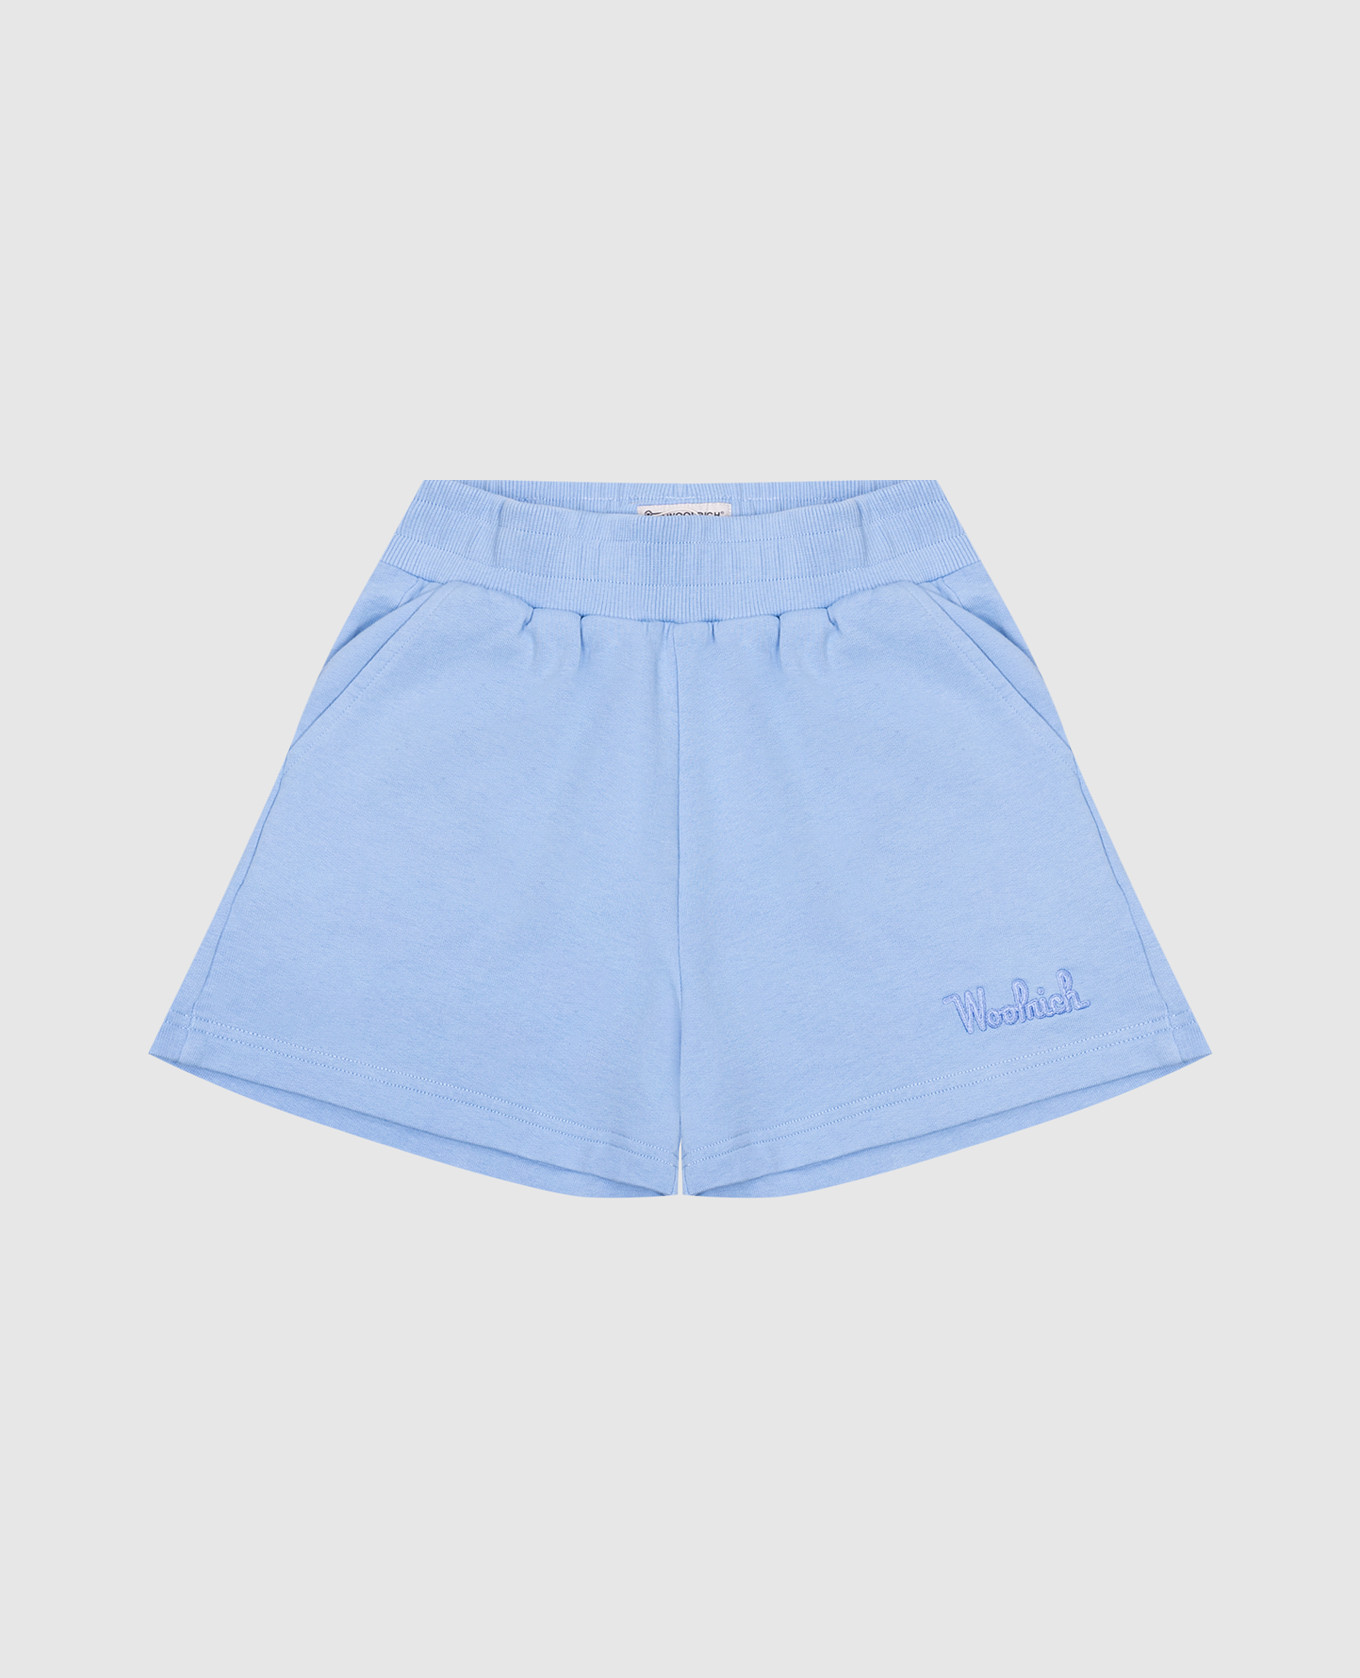 Children's blue shorts with logo embroidery